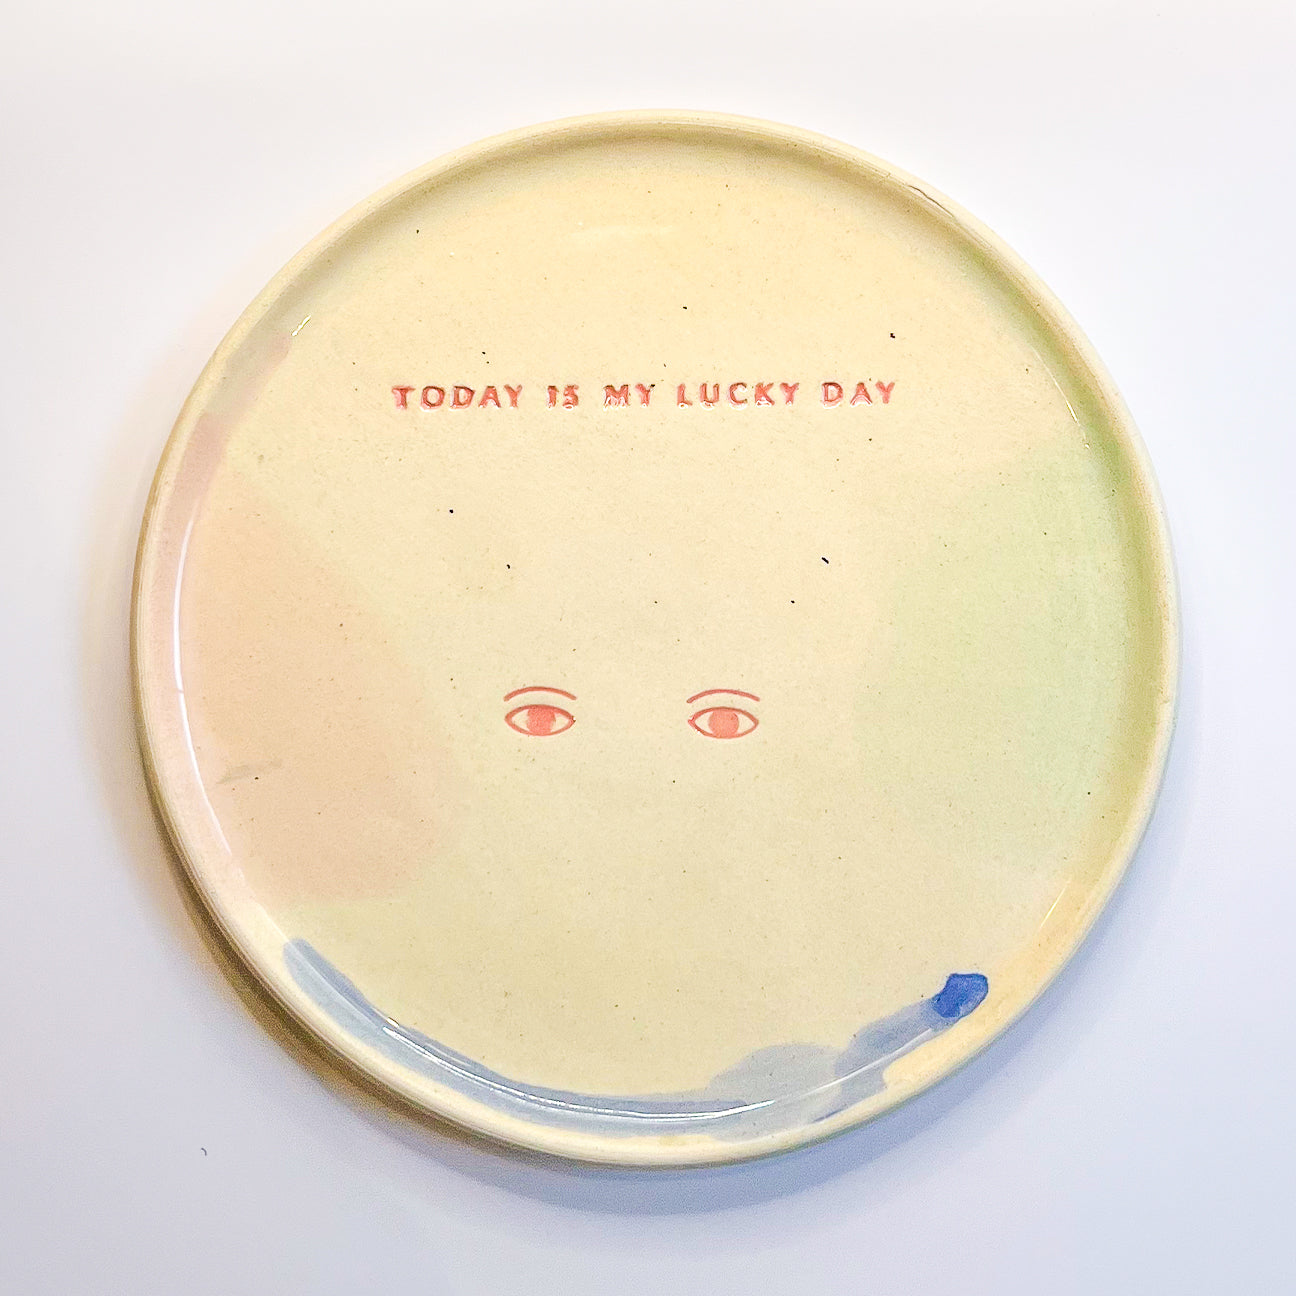 Plato Mediano - Today is my lucky Day